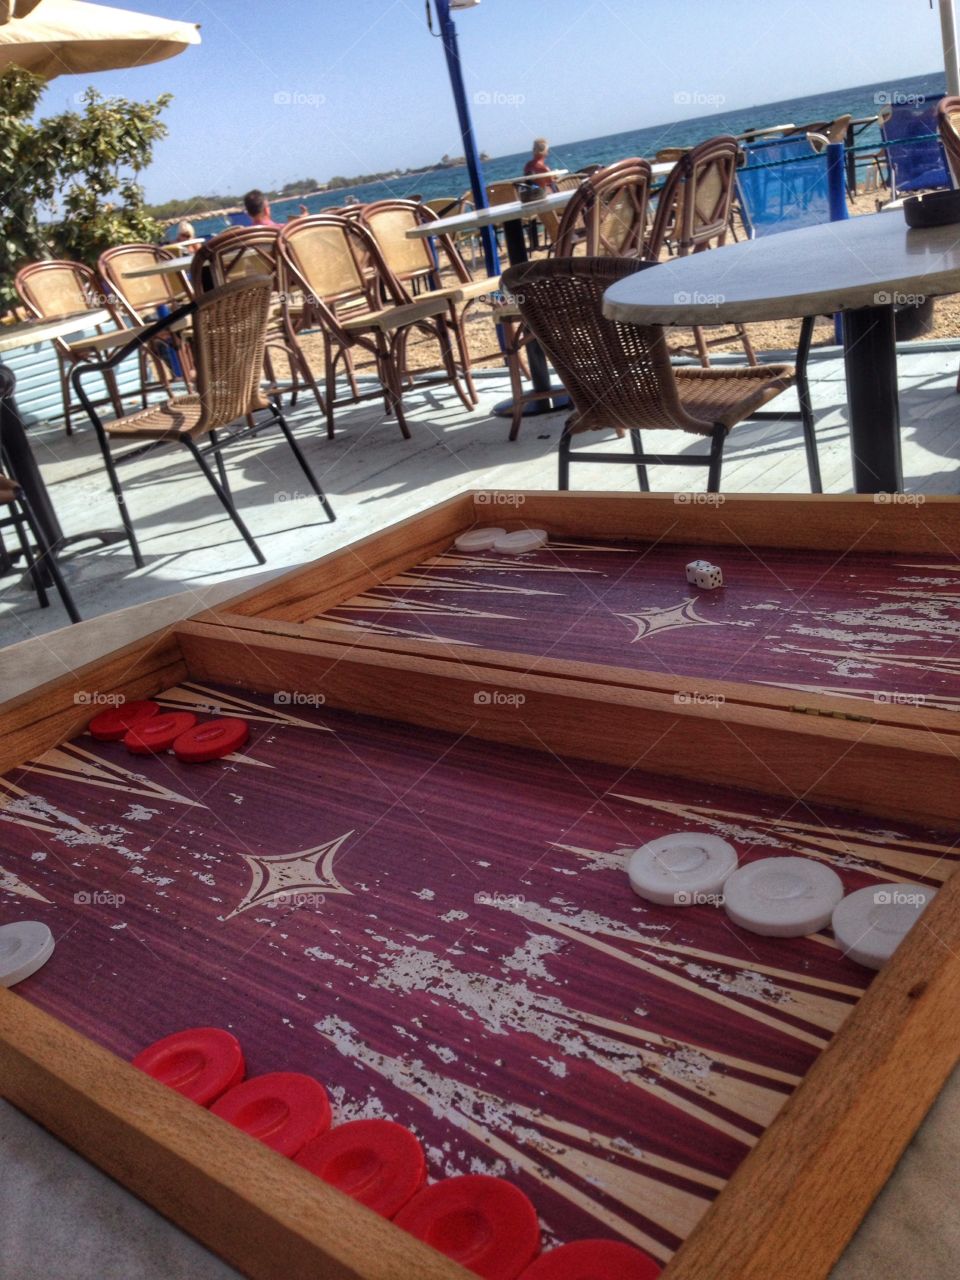 Playing backgammon at the beach